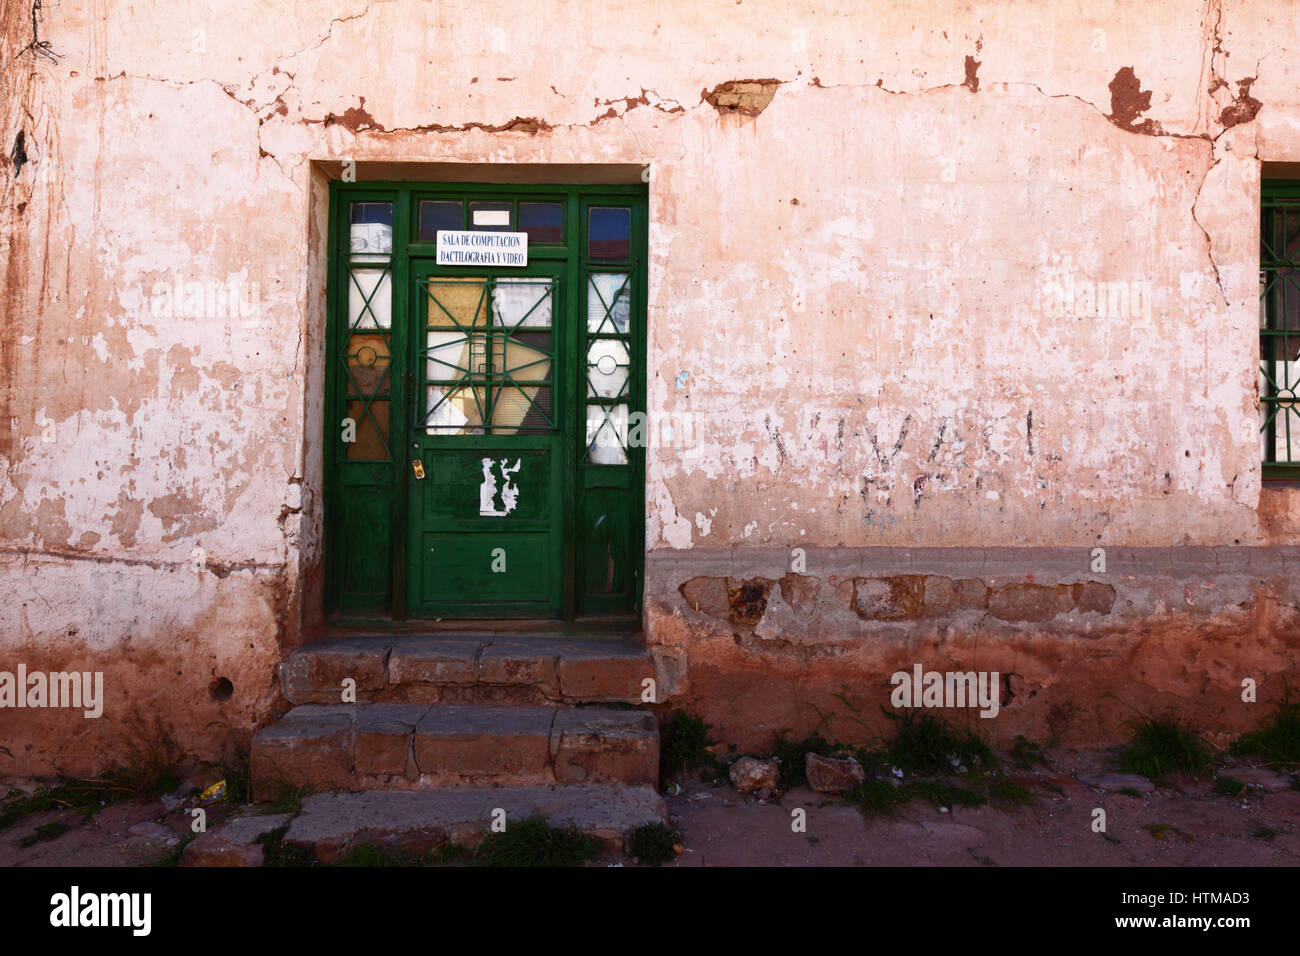 Entrance to Computing and Video room of school in rustic building in Pulacayo, Potosi Department, Bolivia Stock Photo